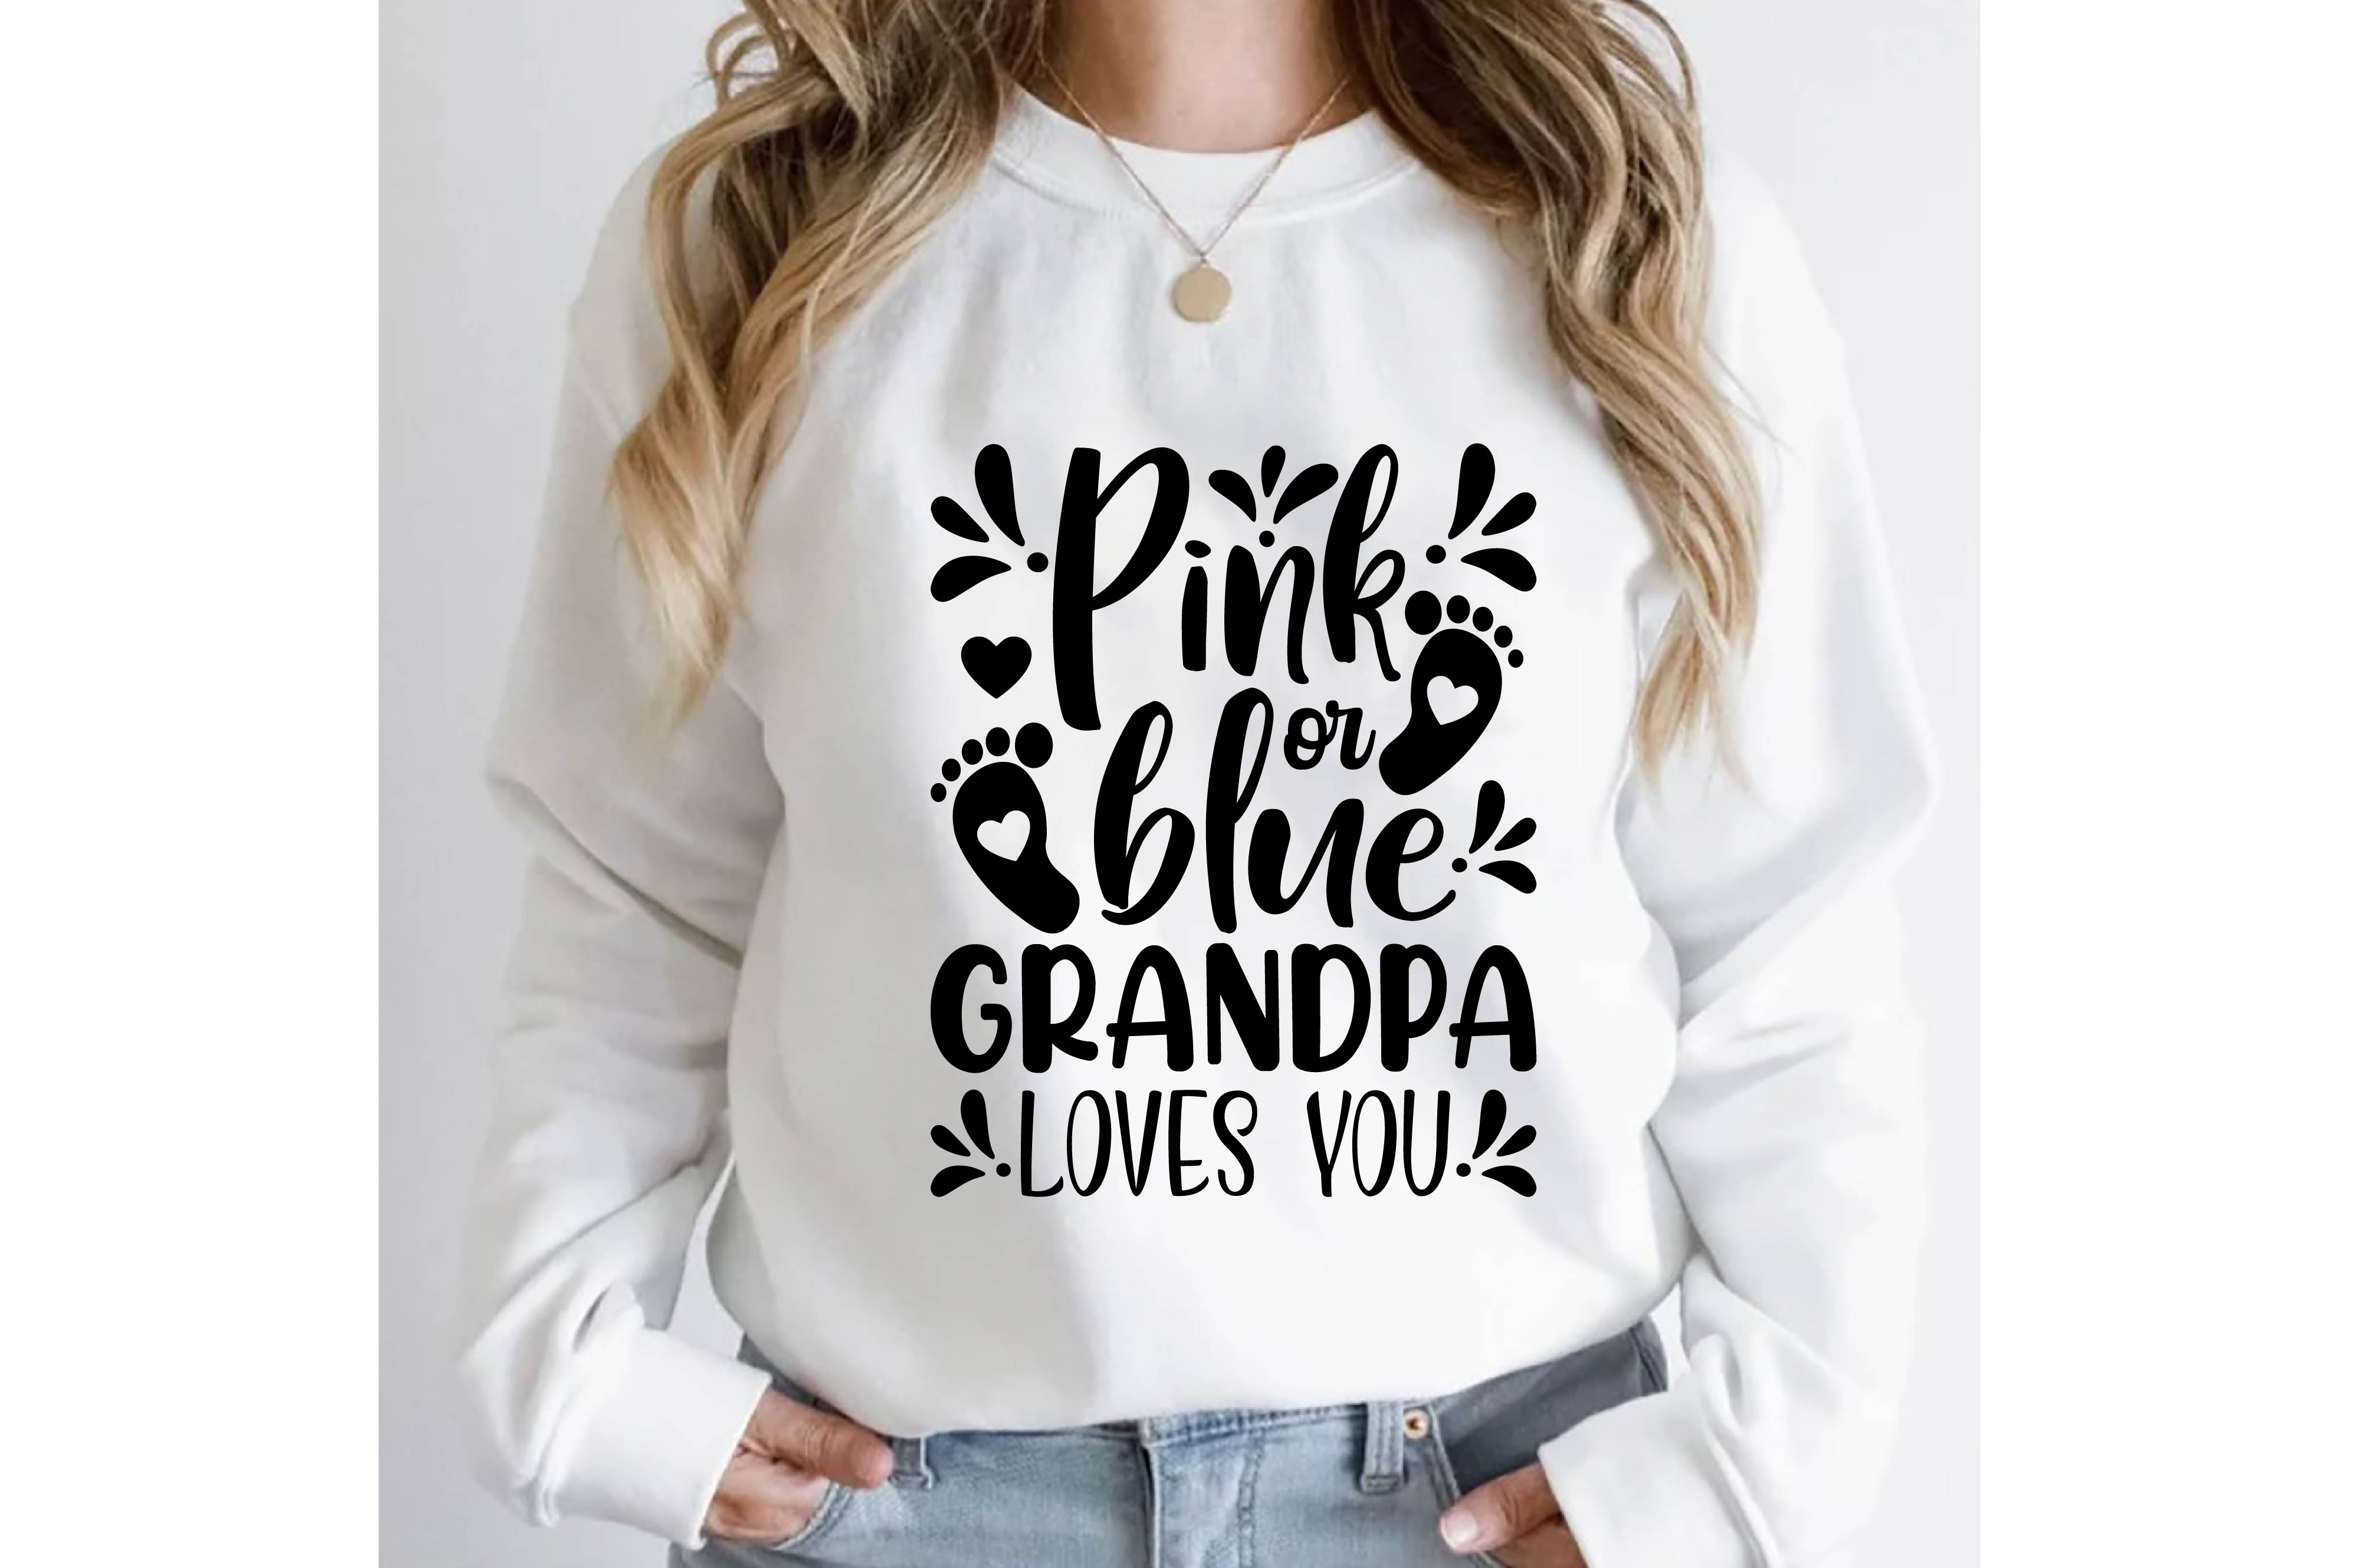 Woman wearing a white sweatshirt that says pink is the new blue grandpa loves you.